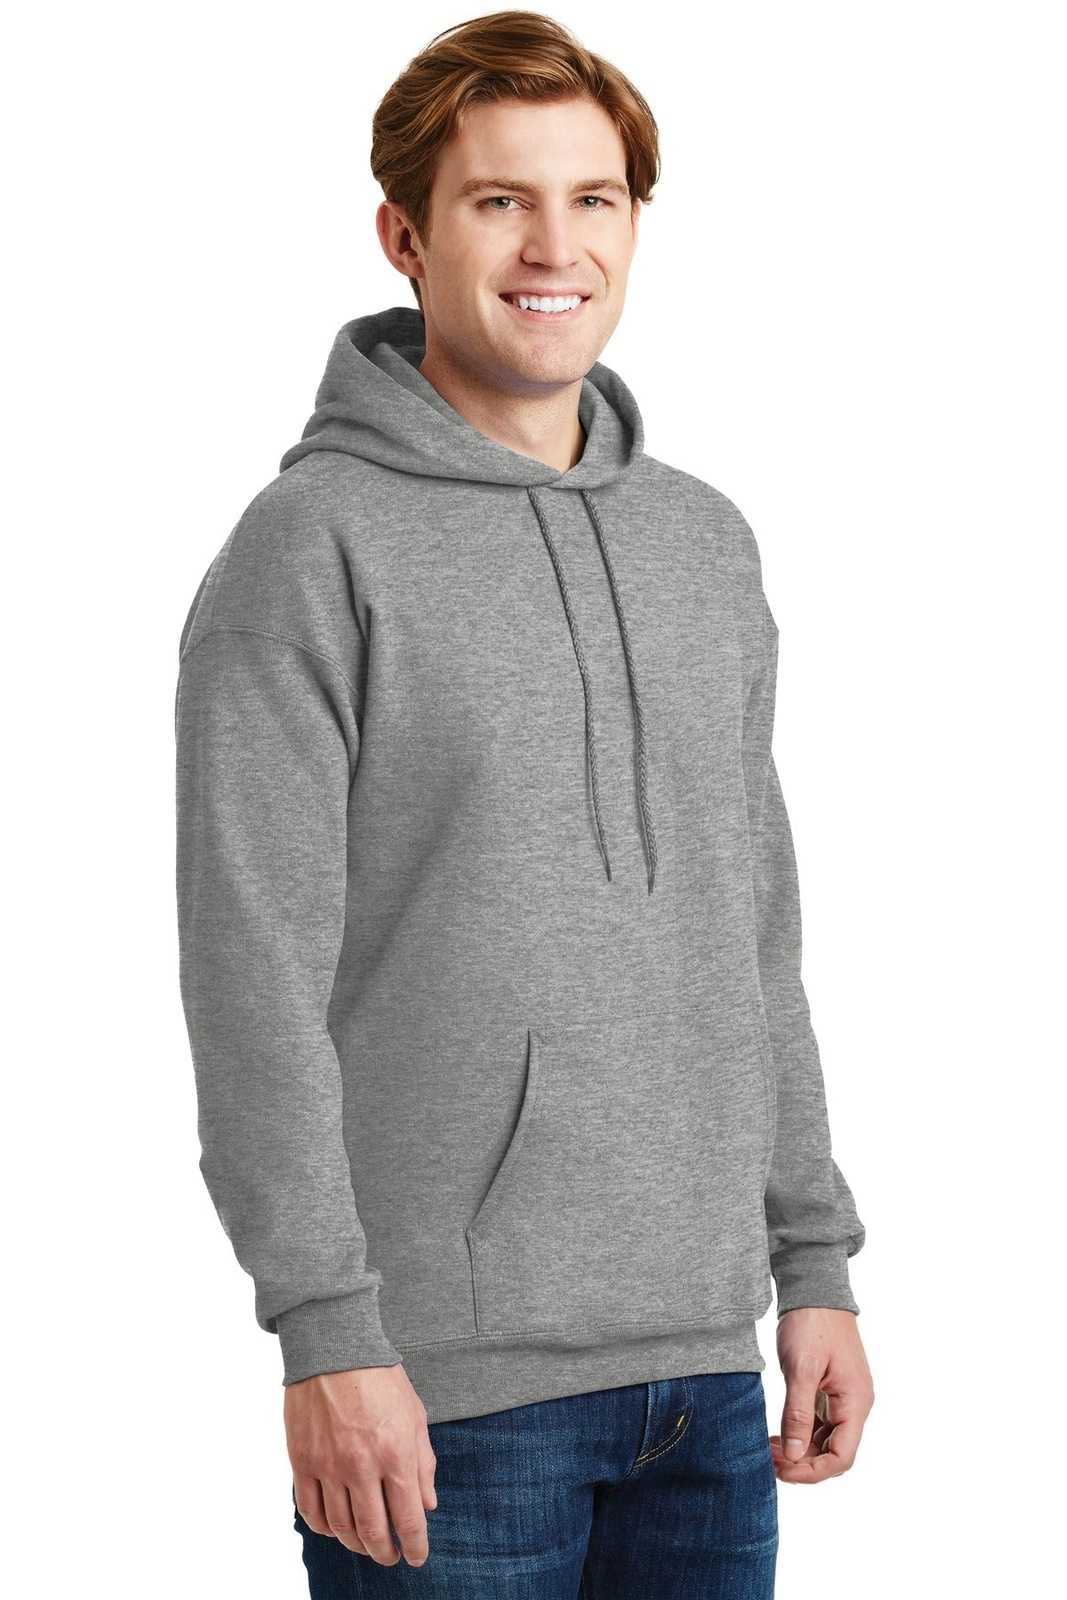 Hanes F170 Ultimate Cotton Pullover Hooded Sweatshirt - Light Steel - HIT a Double